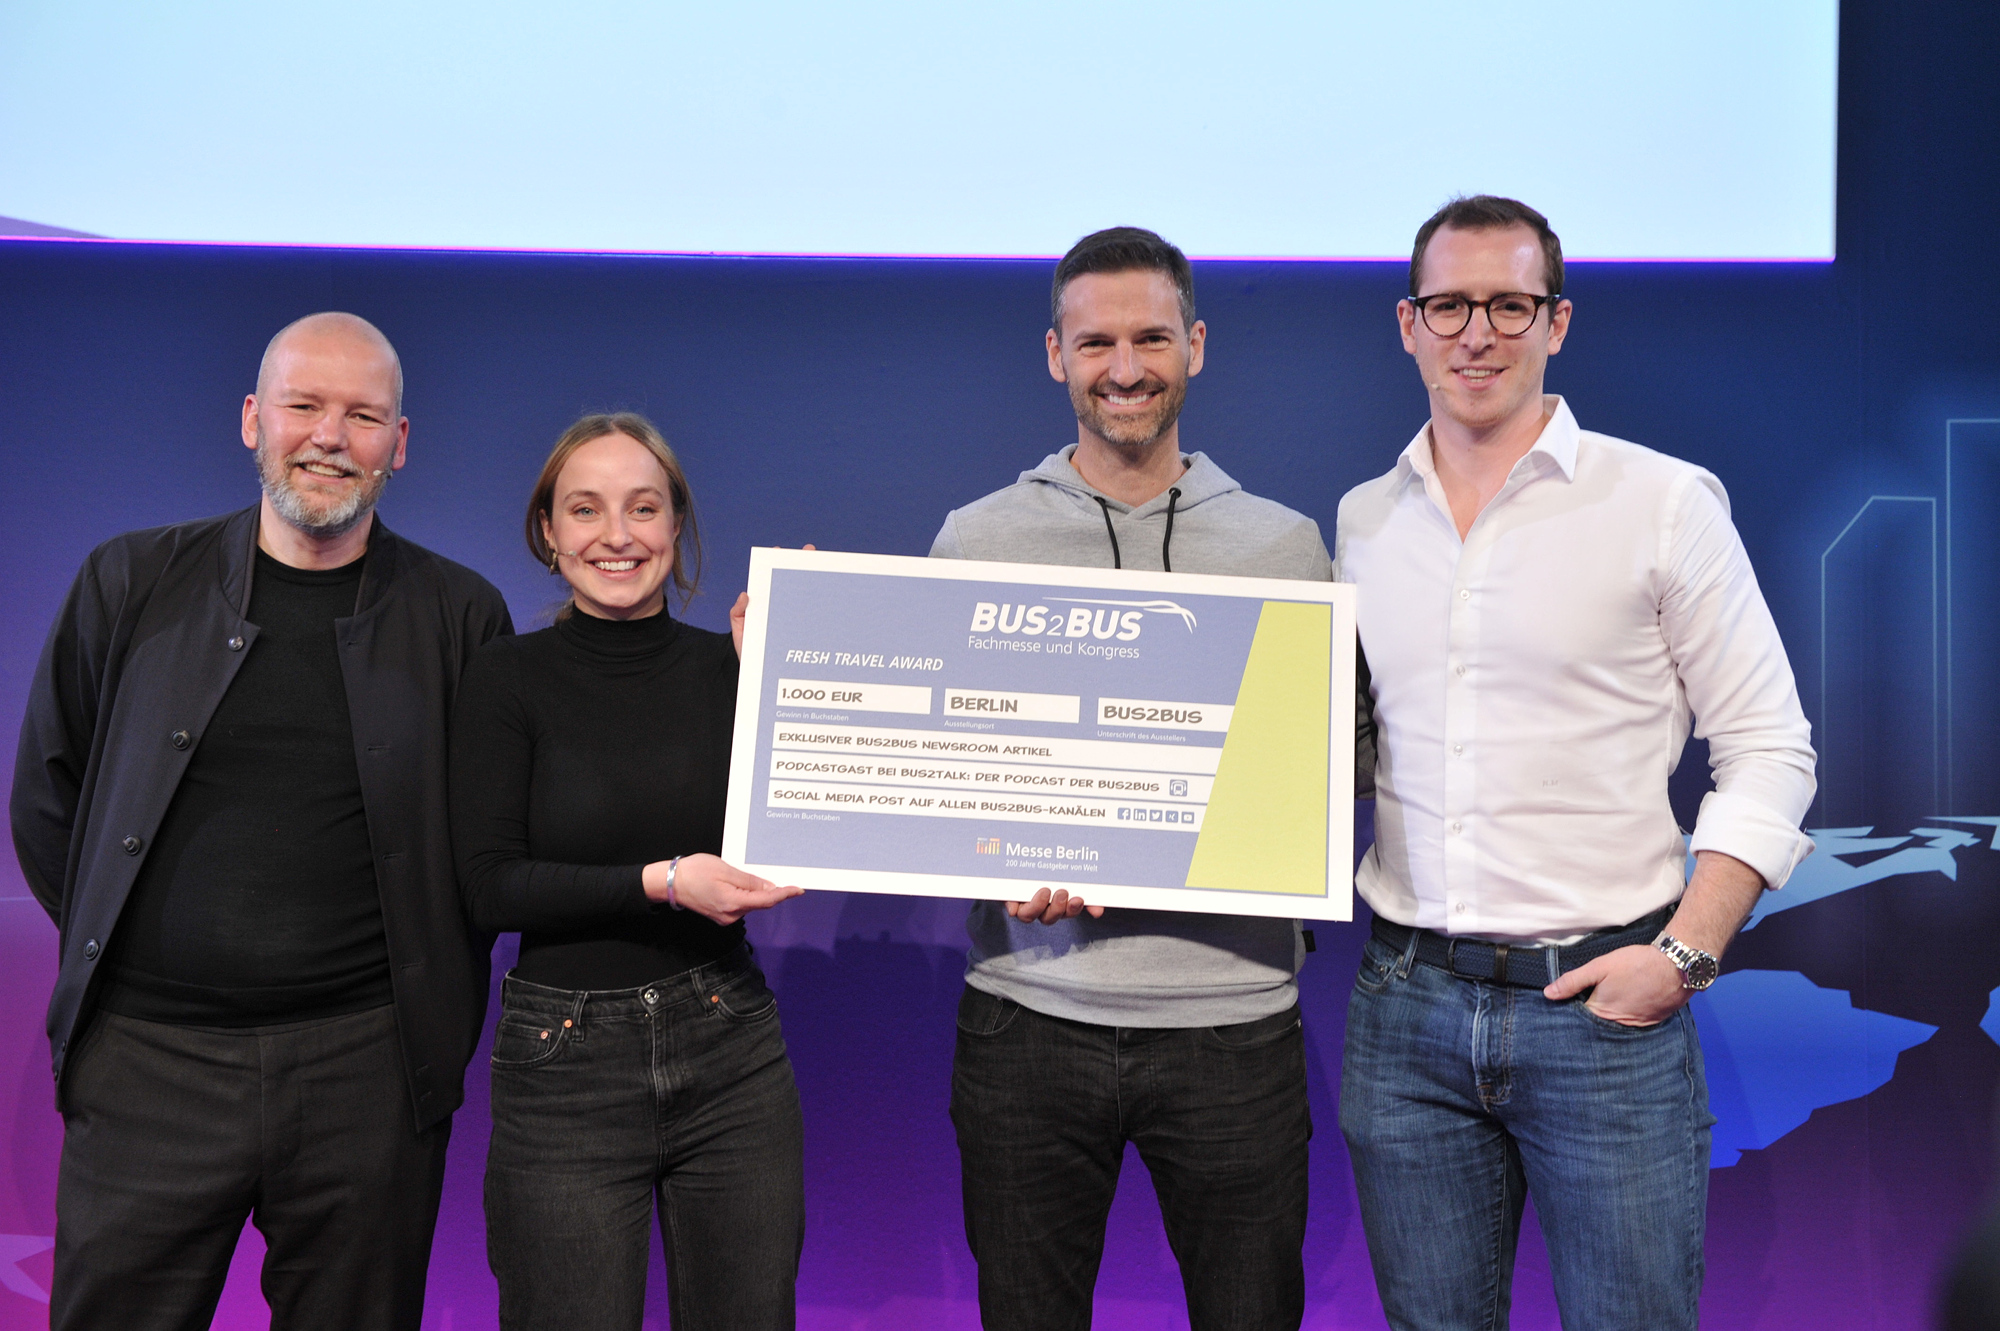 The image shows four people. In the middle is Luca Bortolani, winner of the Fresh Travel Award 2022 and co-founder and CEO of Twiliner. 